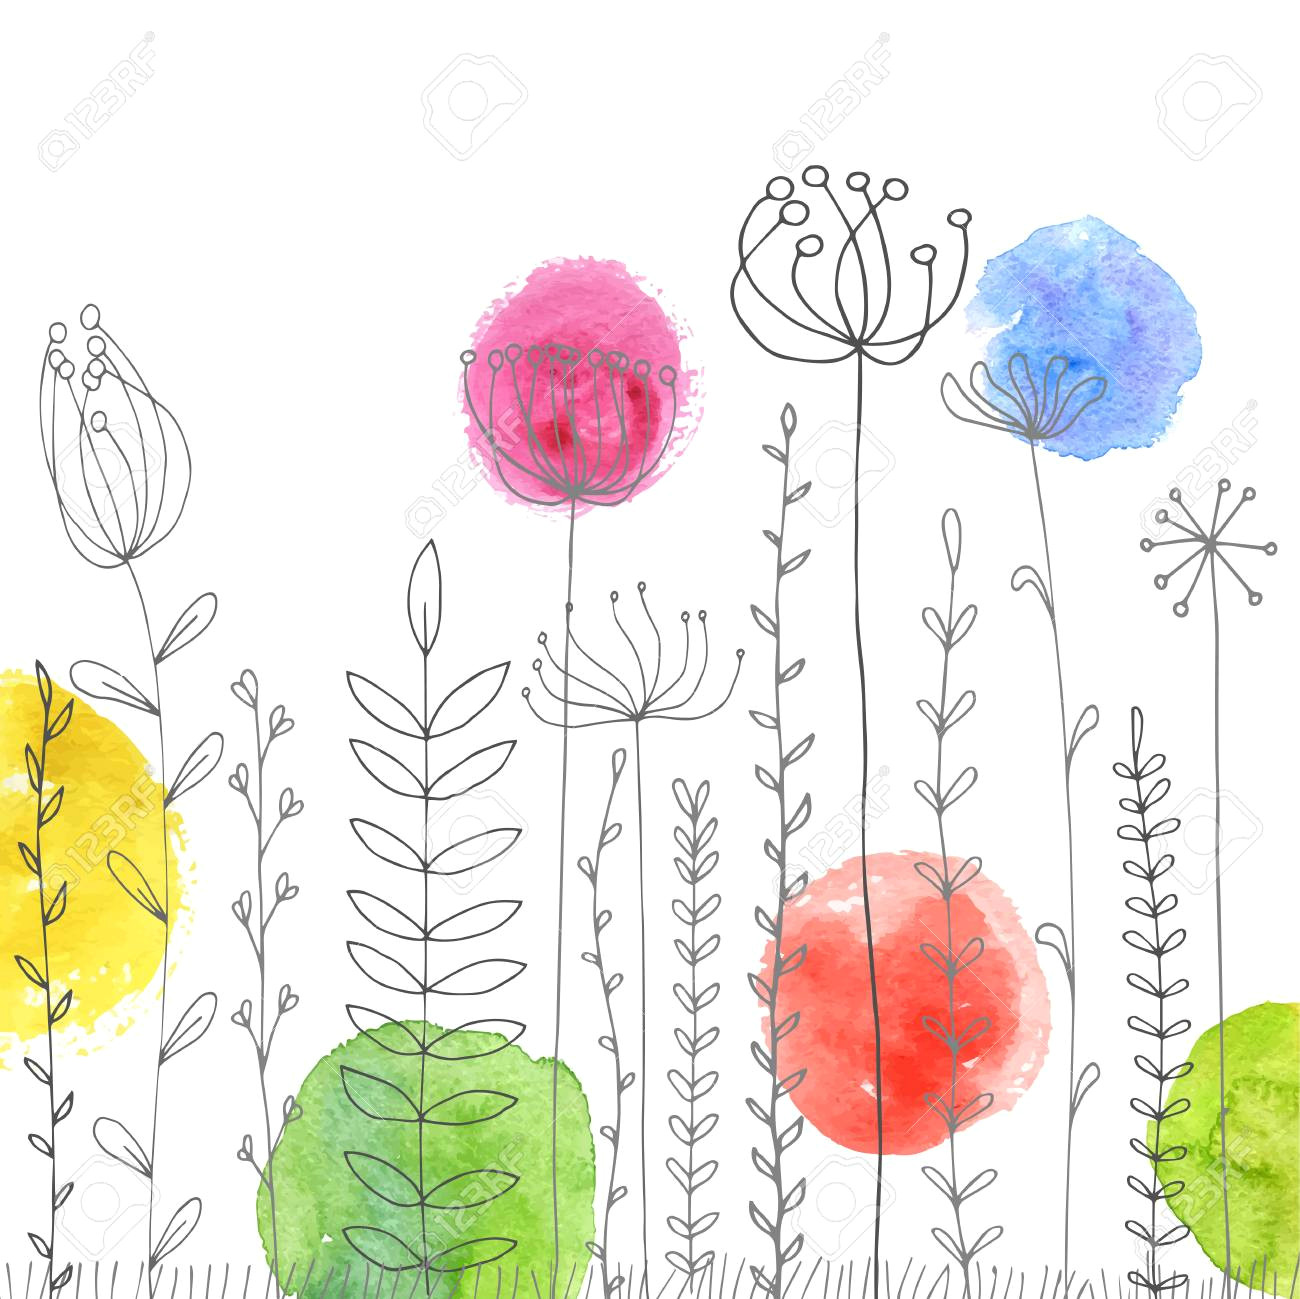 Drawings Of Flowers Abstract Vector Background with Doodle Abstract Herbs and Flowers and